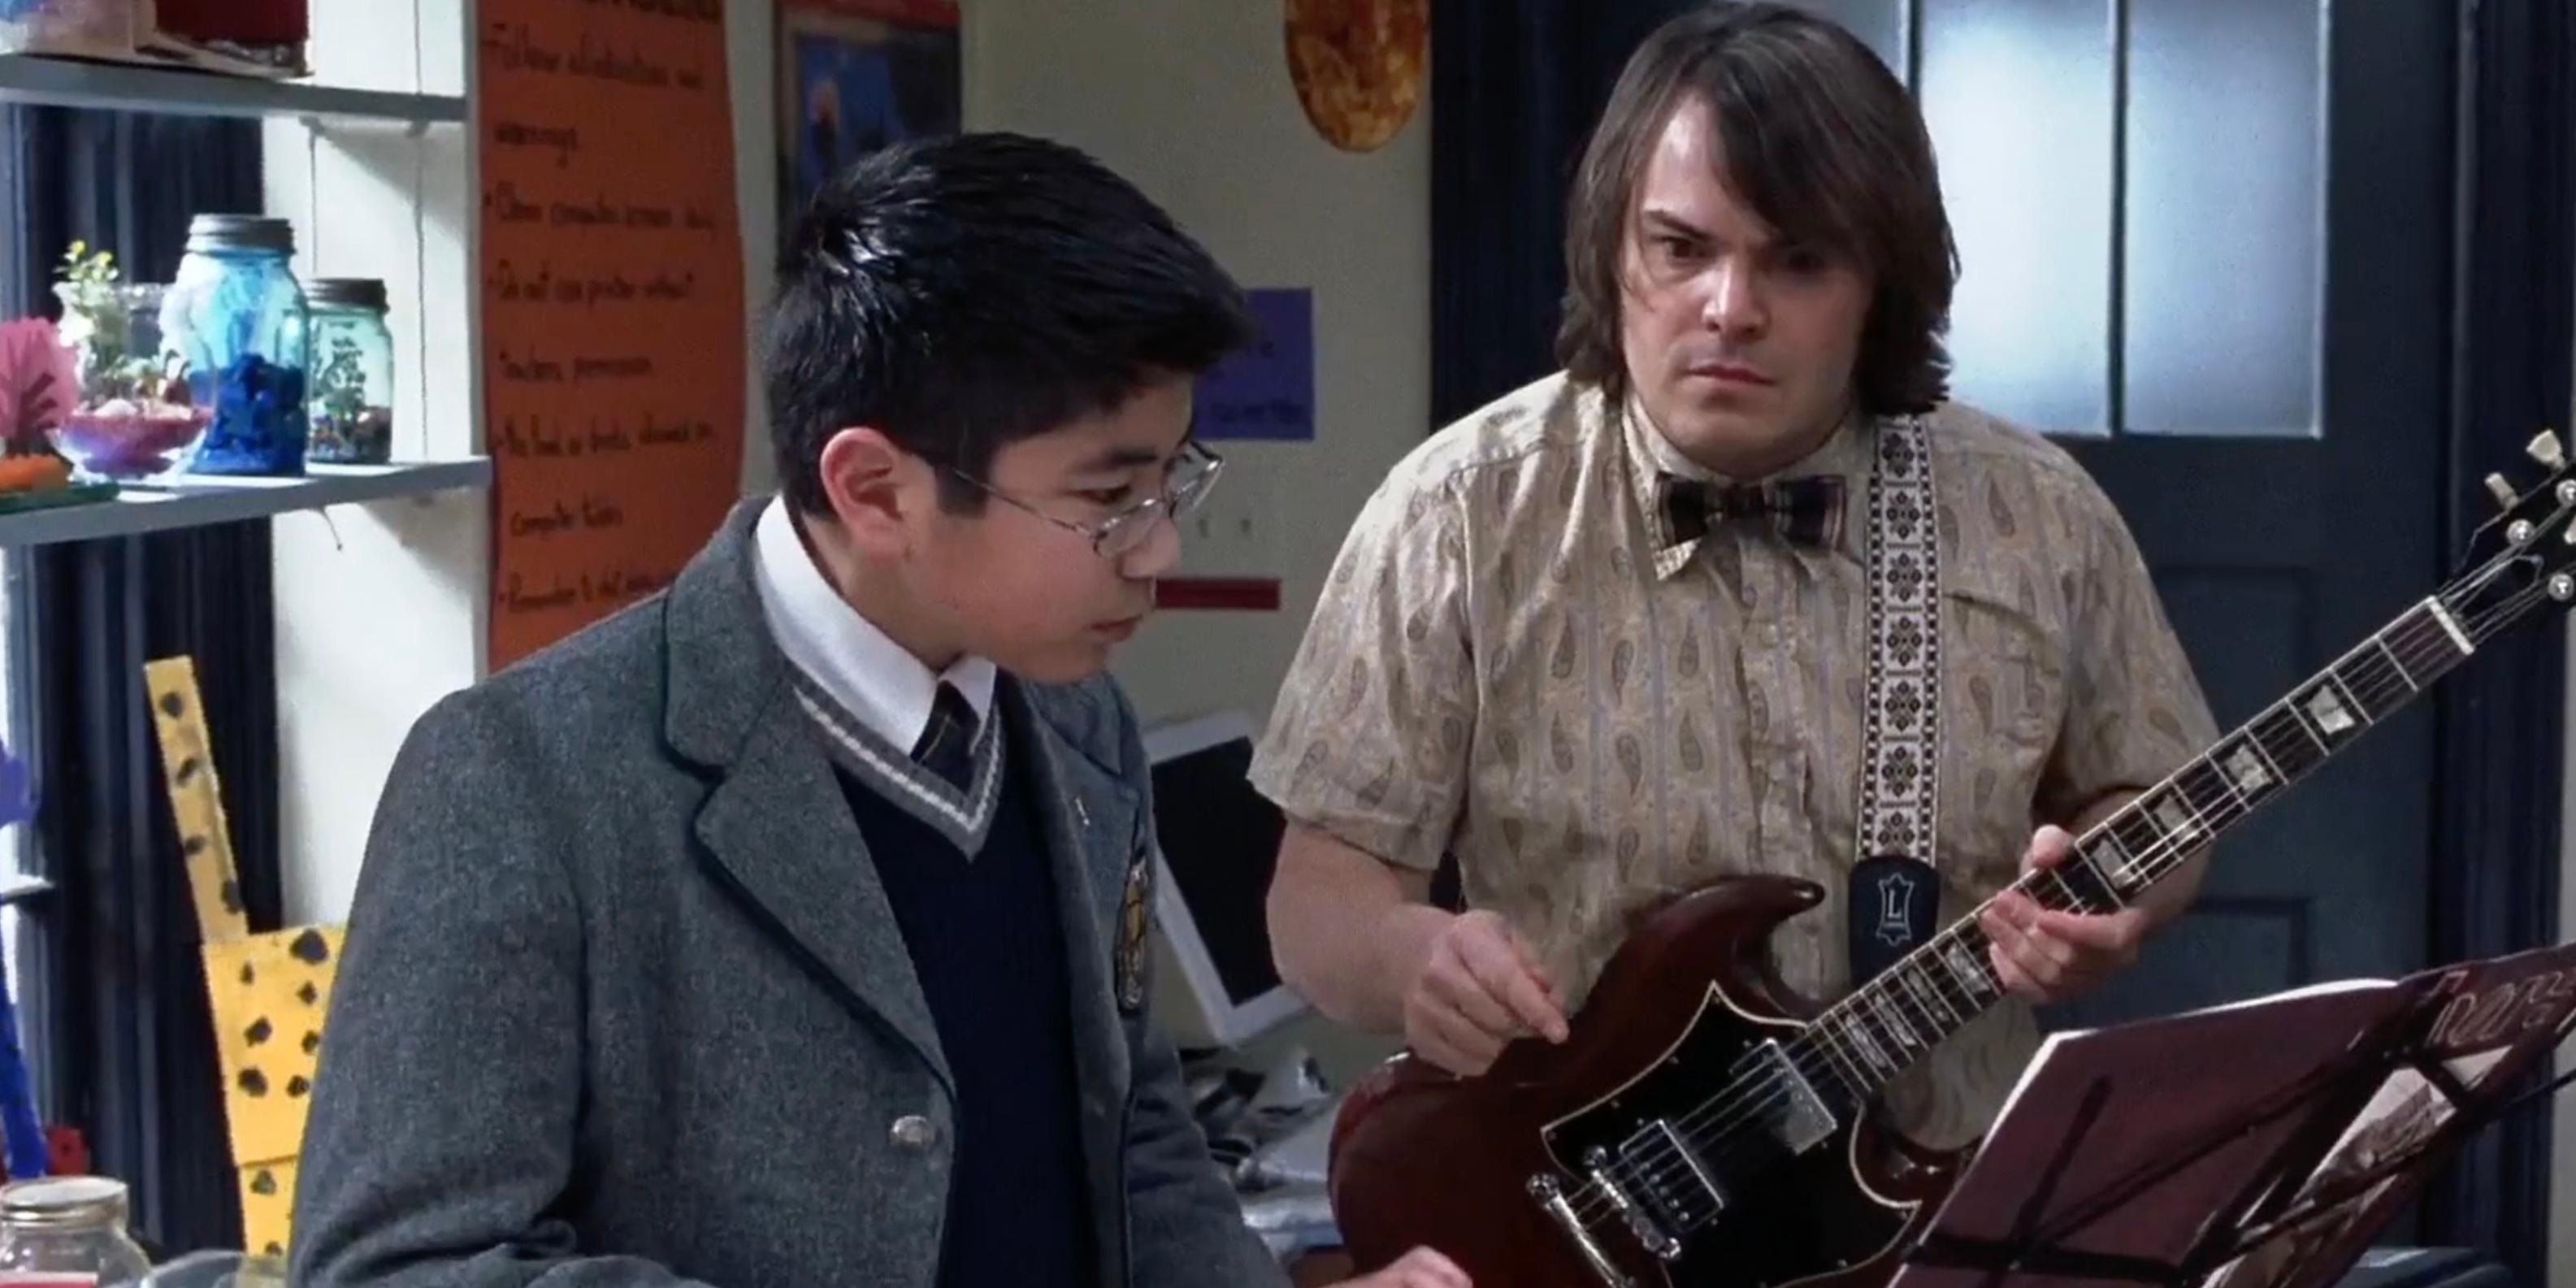 Dewey teaches Lawrence to play Touch Me in School of Rock